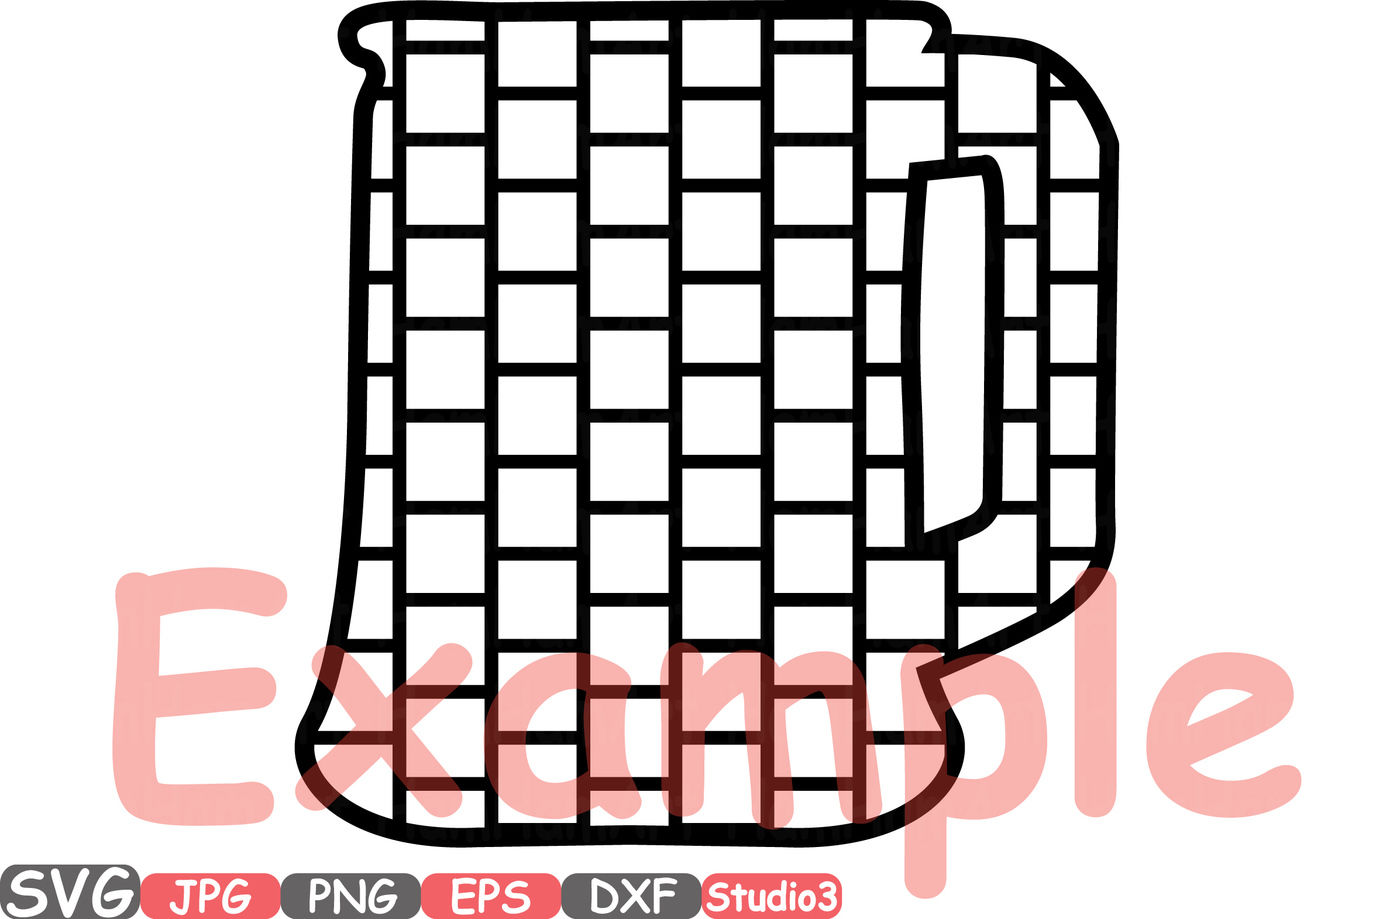 Download Chevron Beer Mug SVG Silhouette Cutting Files sign icons ...